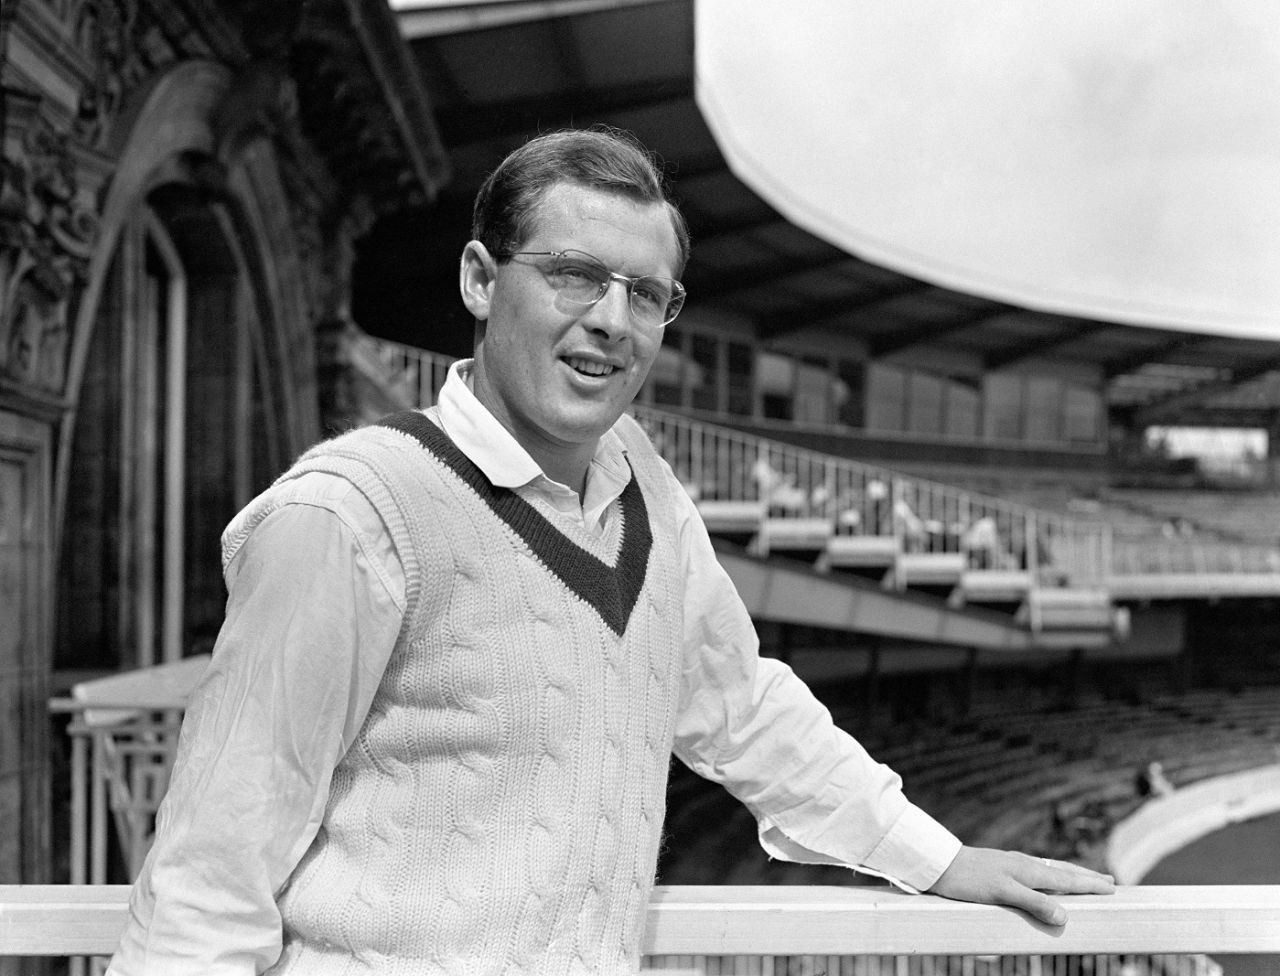 Geoffrey Boycott's first-class career with Yorkshire began in 1962